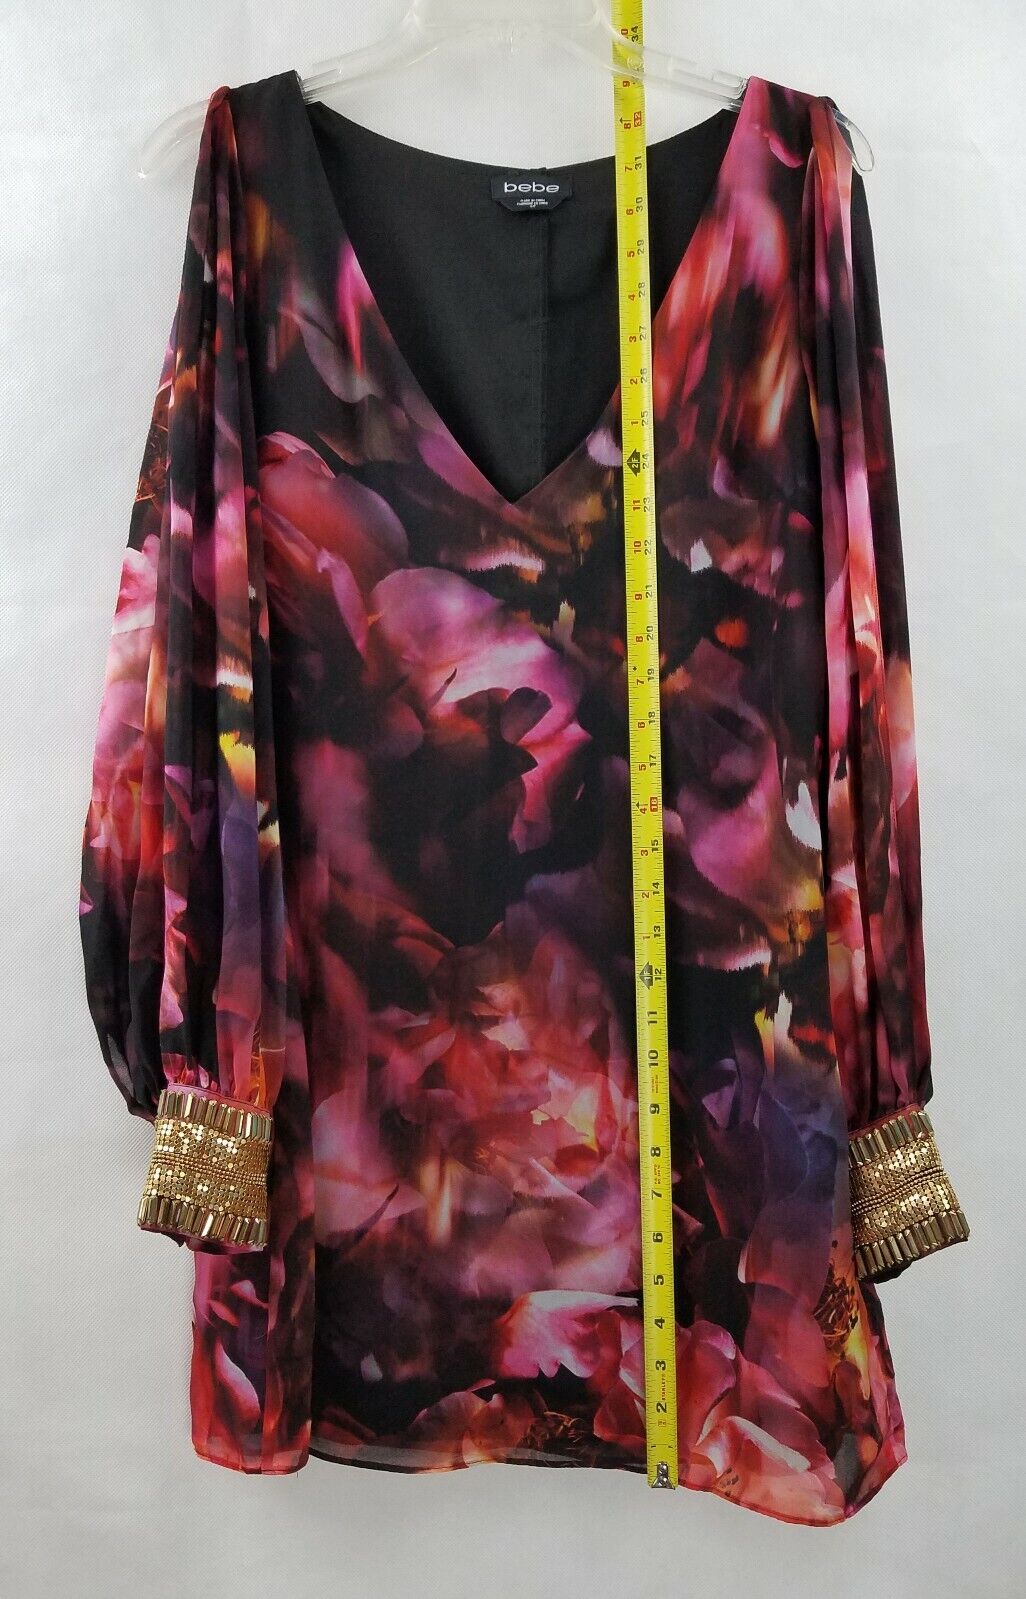 Bebe Woman's V Neck Tunic Size S Black Red Pink A… - image 9